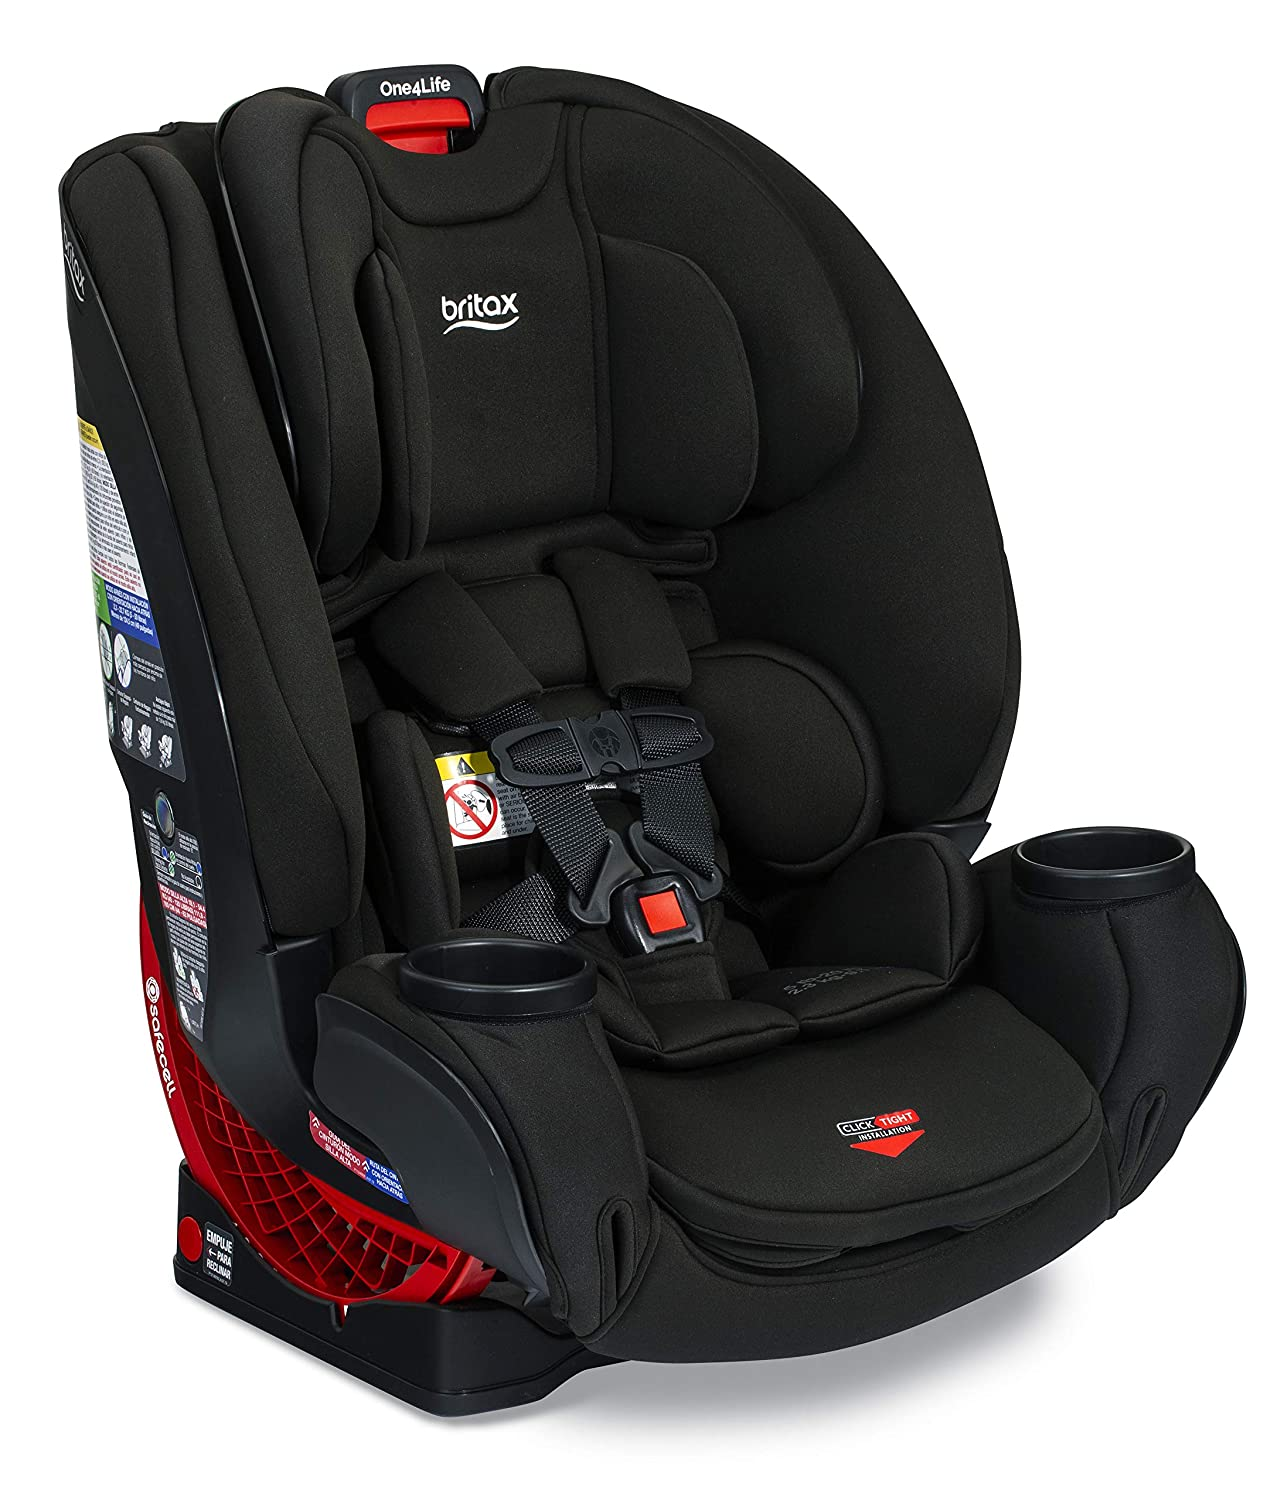 Britax One4Life ClickTight All-In-One Car Seat $328.49